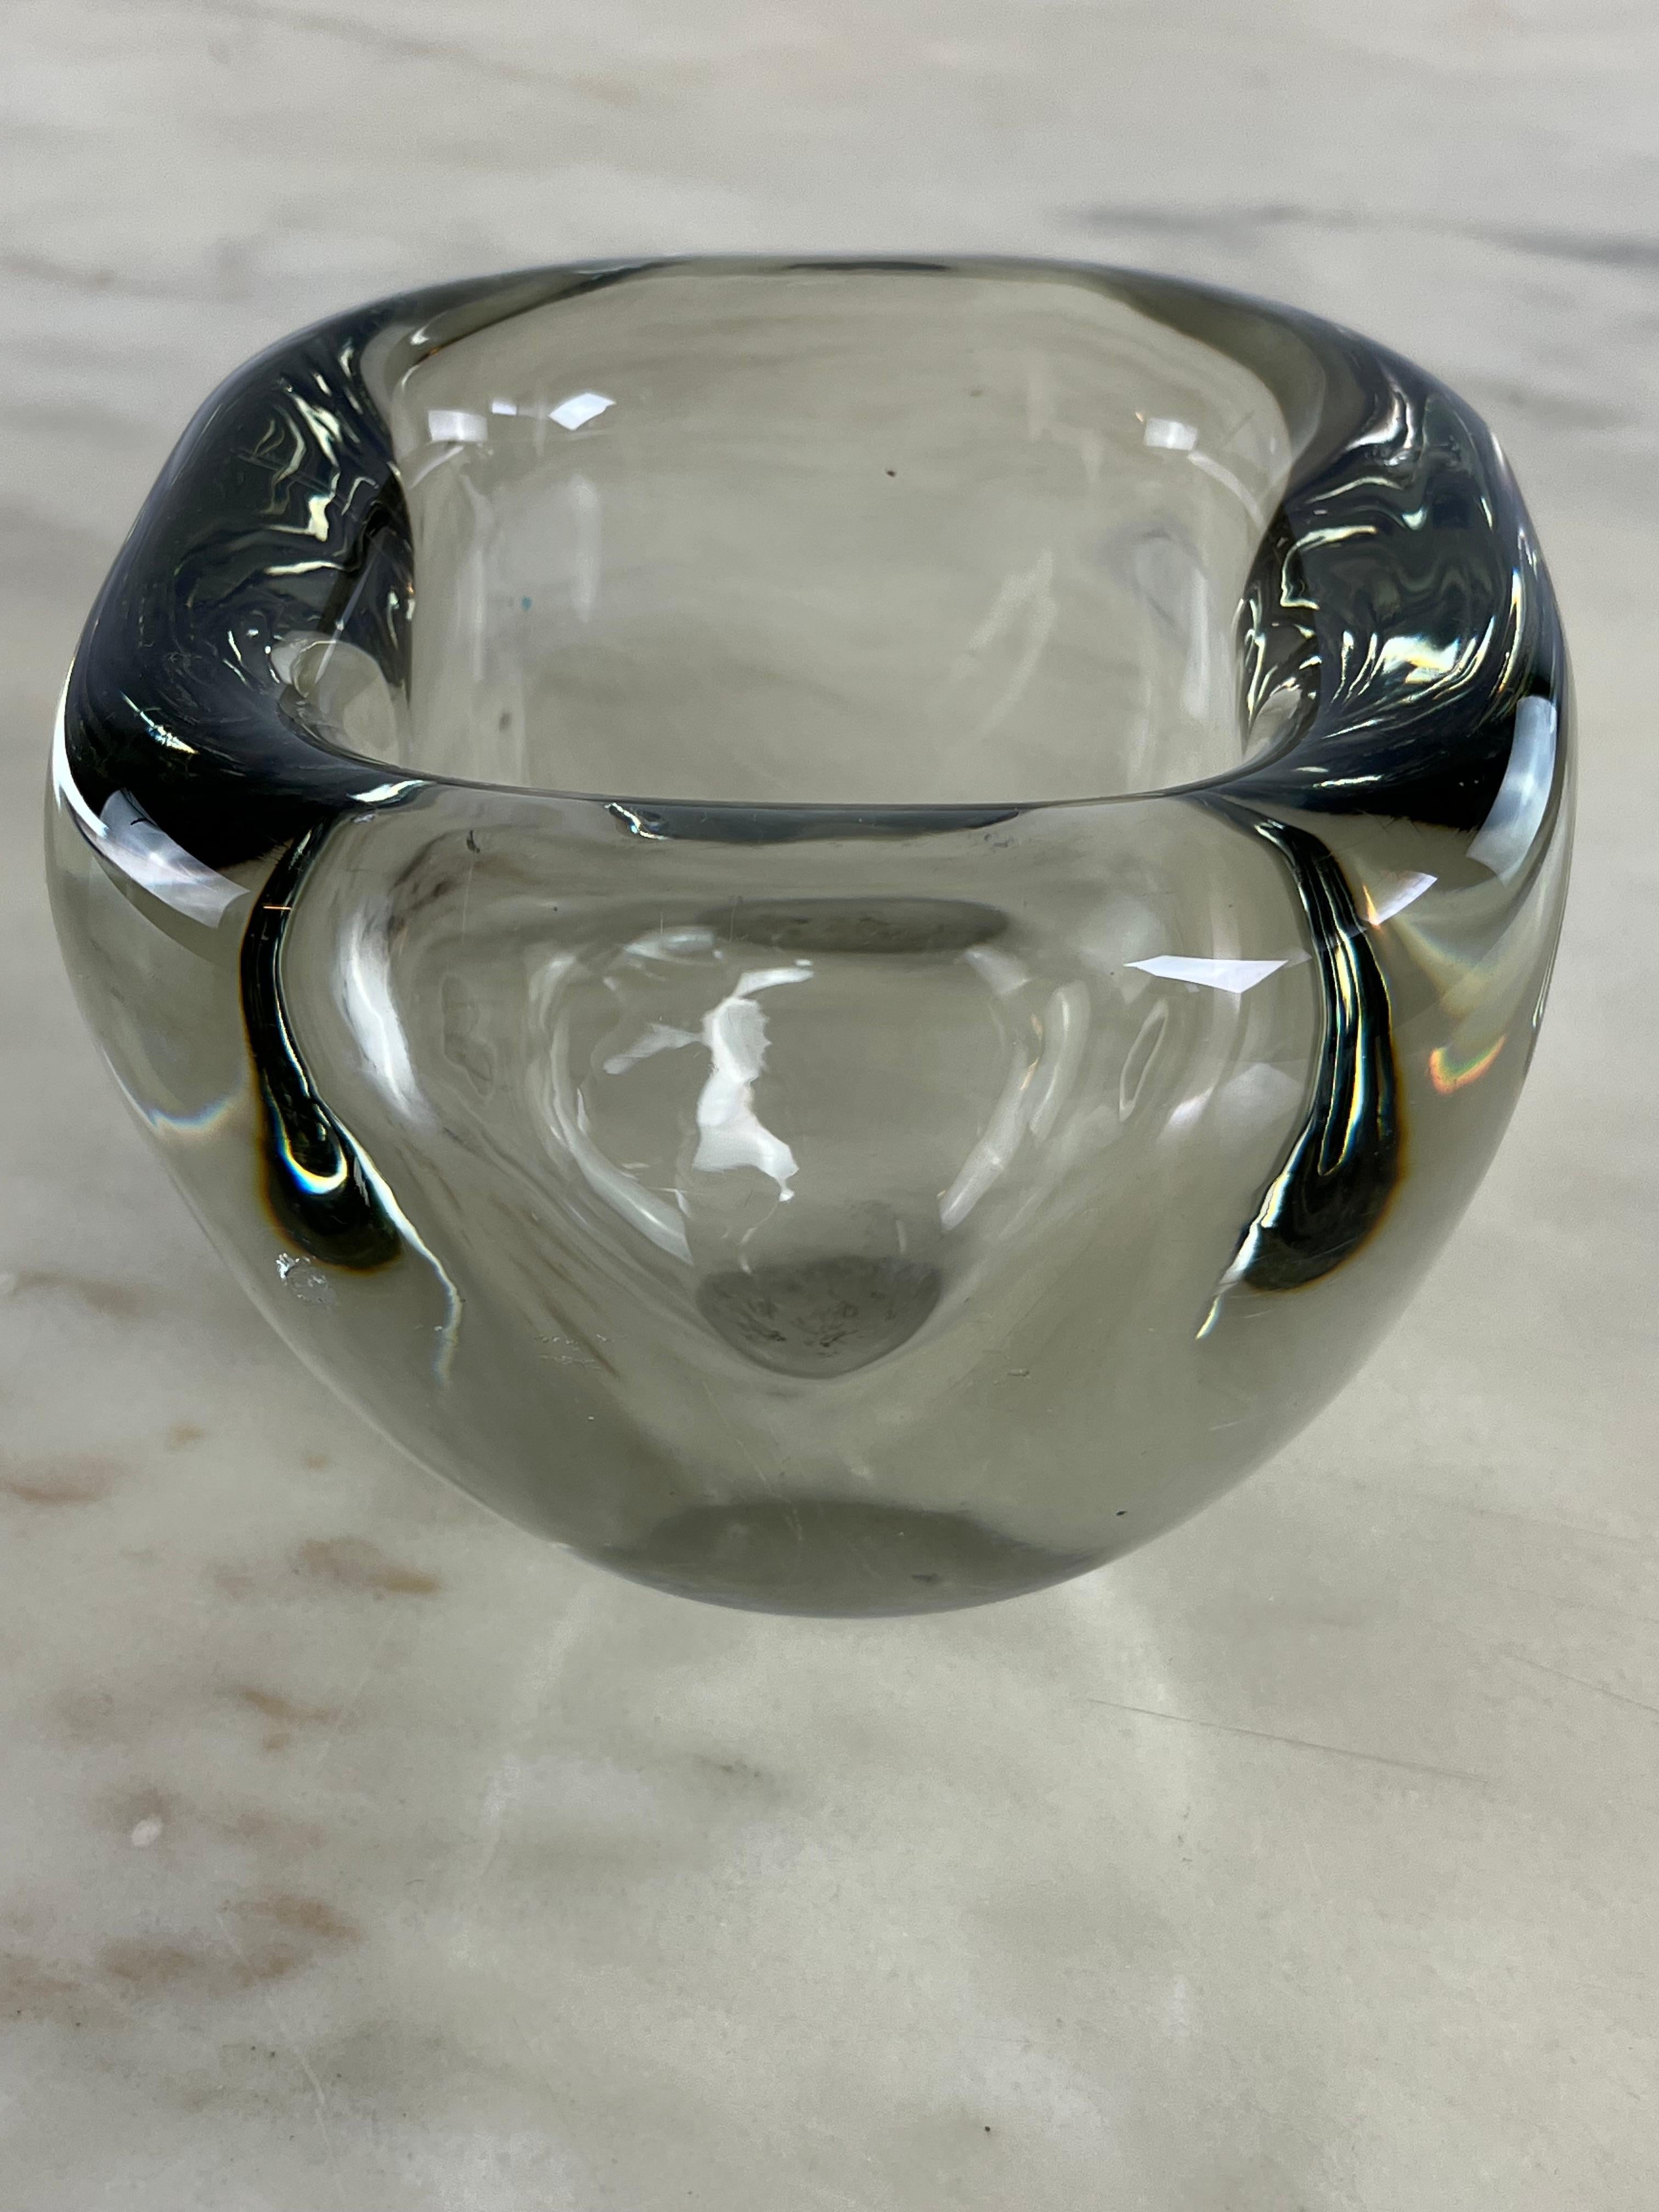 
Large mid-century Murano glass ashtray, 1960s Italian design
Intact and in good condition.
Small scratches on the bottom.